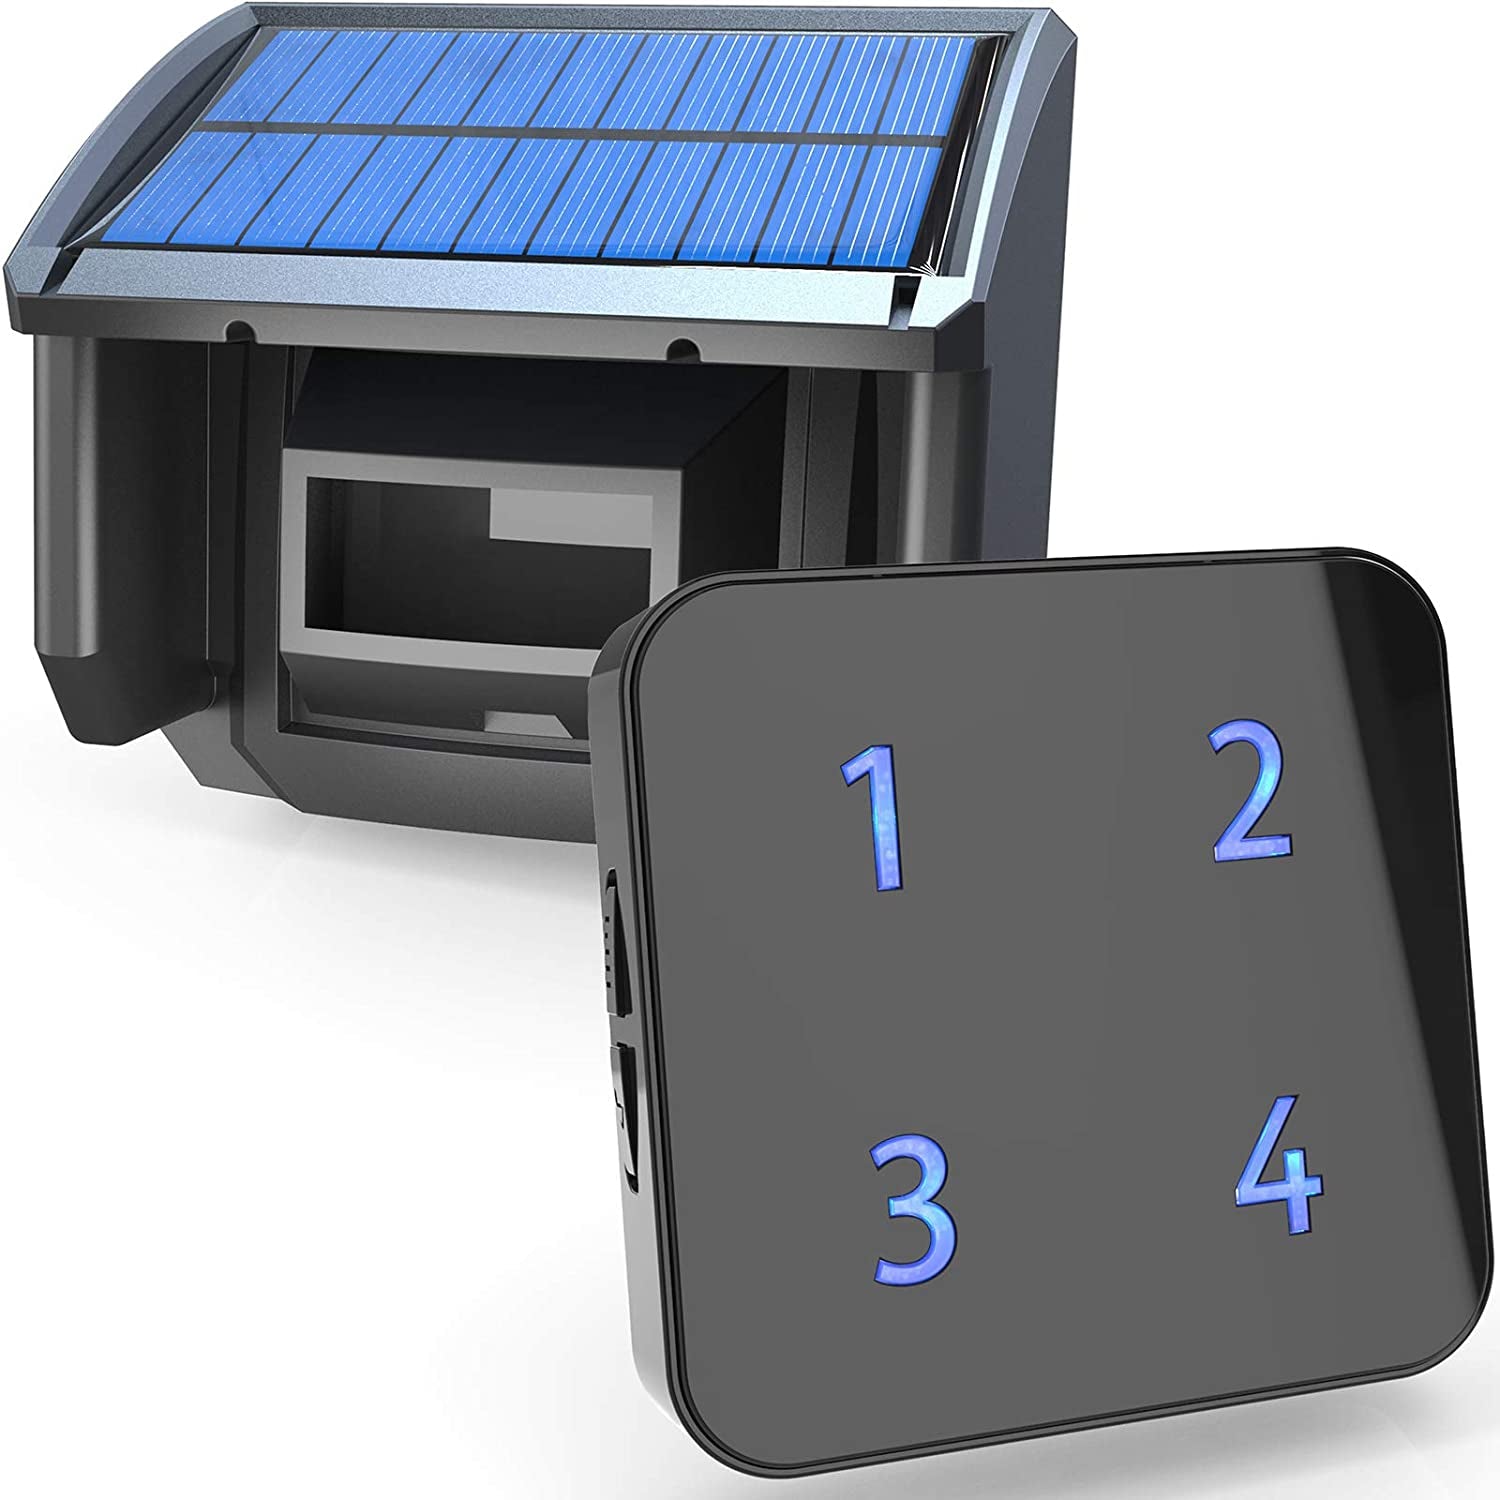 HTZSAFE, Extra Wireless Plug-In Receiver for HTZSAFE Solar Alarms- up to 4 Zones and Each Zone Has 35 Optional Melodies- 4 Adjustable Volume Levels